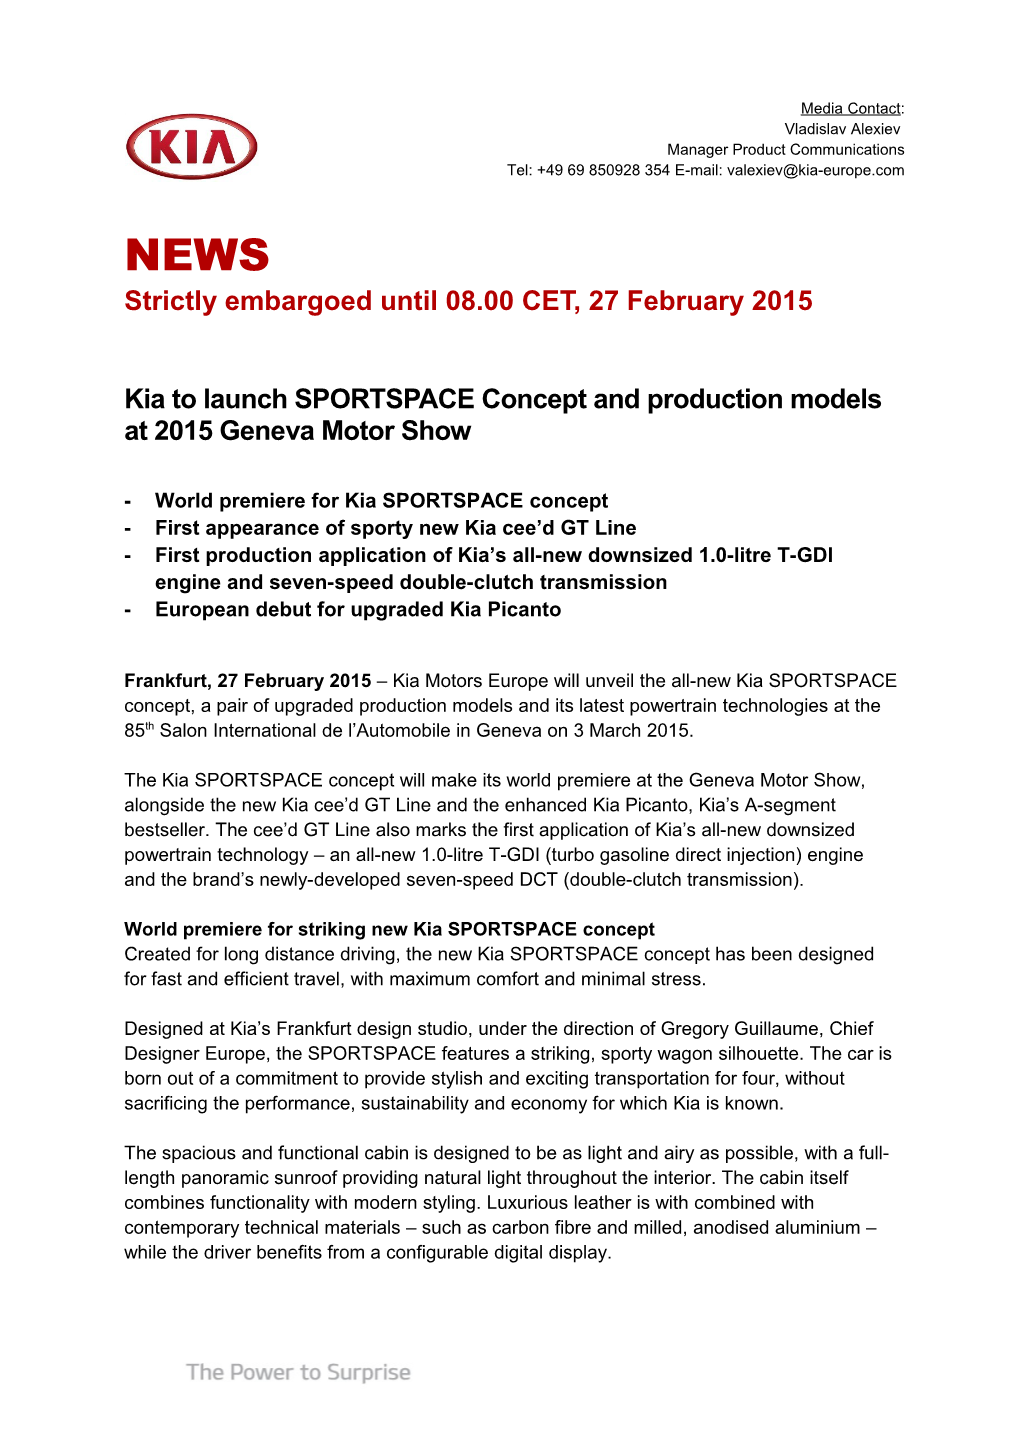 Kia to Launch SPORTSPACE Concept and Production Models at 2015 Geneva Motor Show